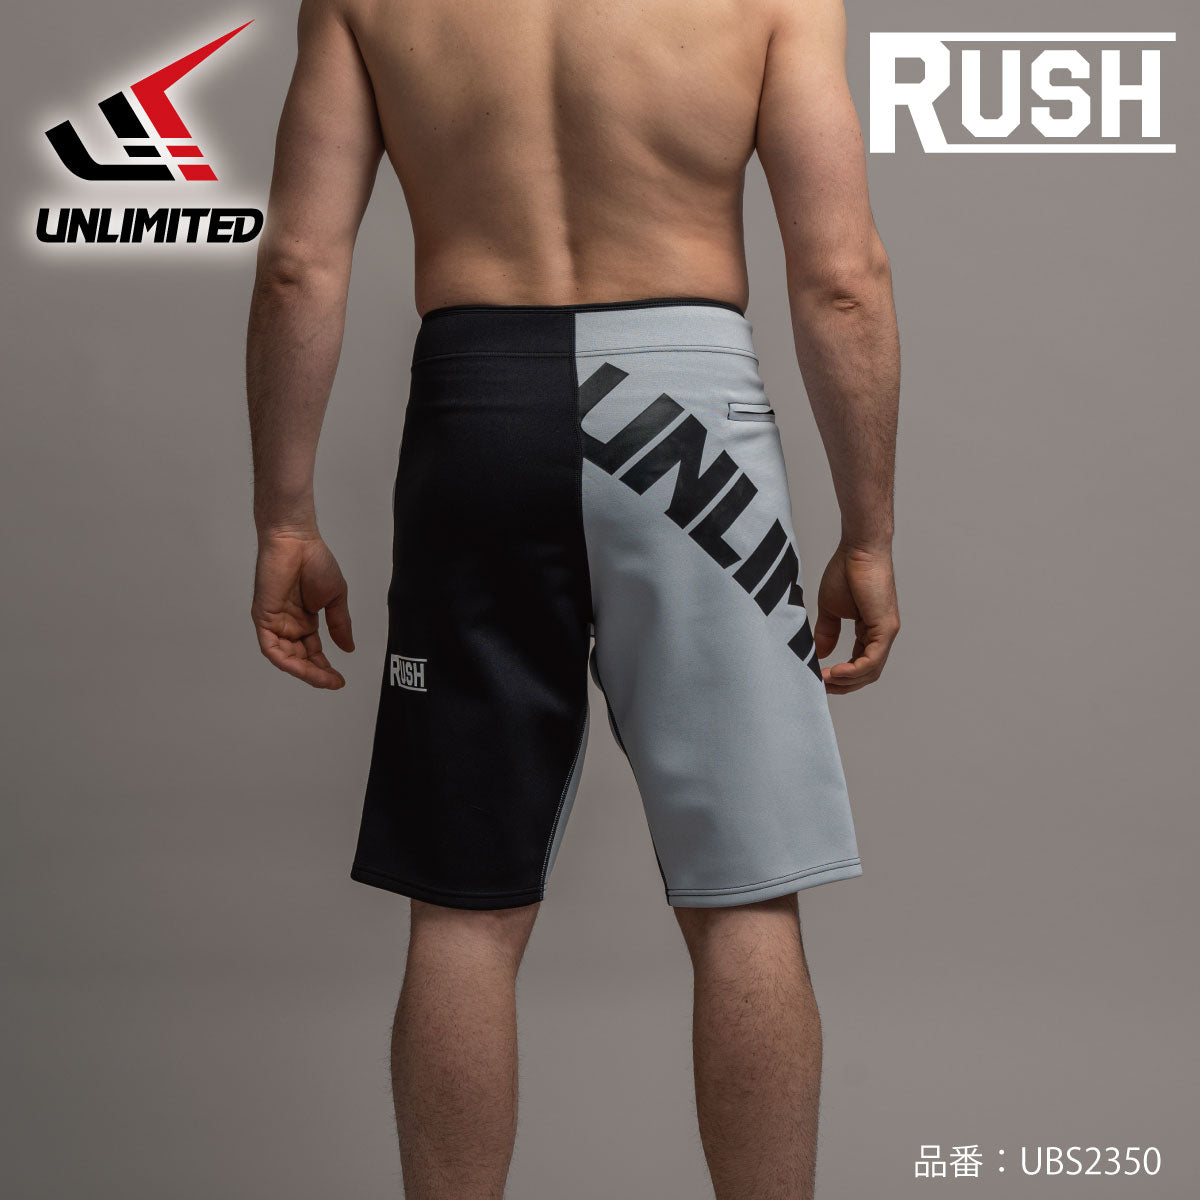 UNLIMITED Neo Shorts Board Shorts NEO LIGHT SHORTS Wet Material Jet Surfing Marine Sports UBS2350